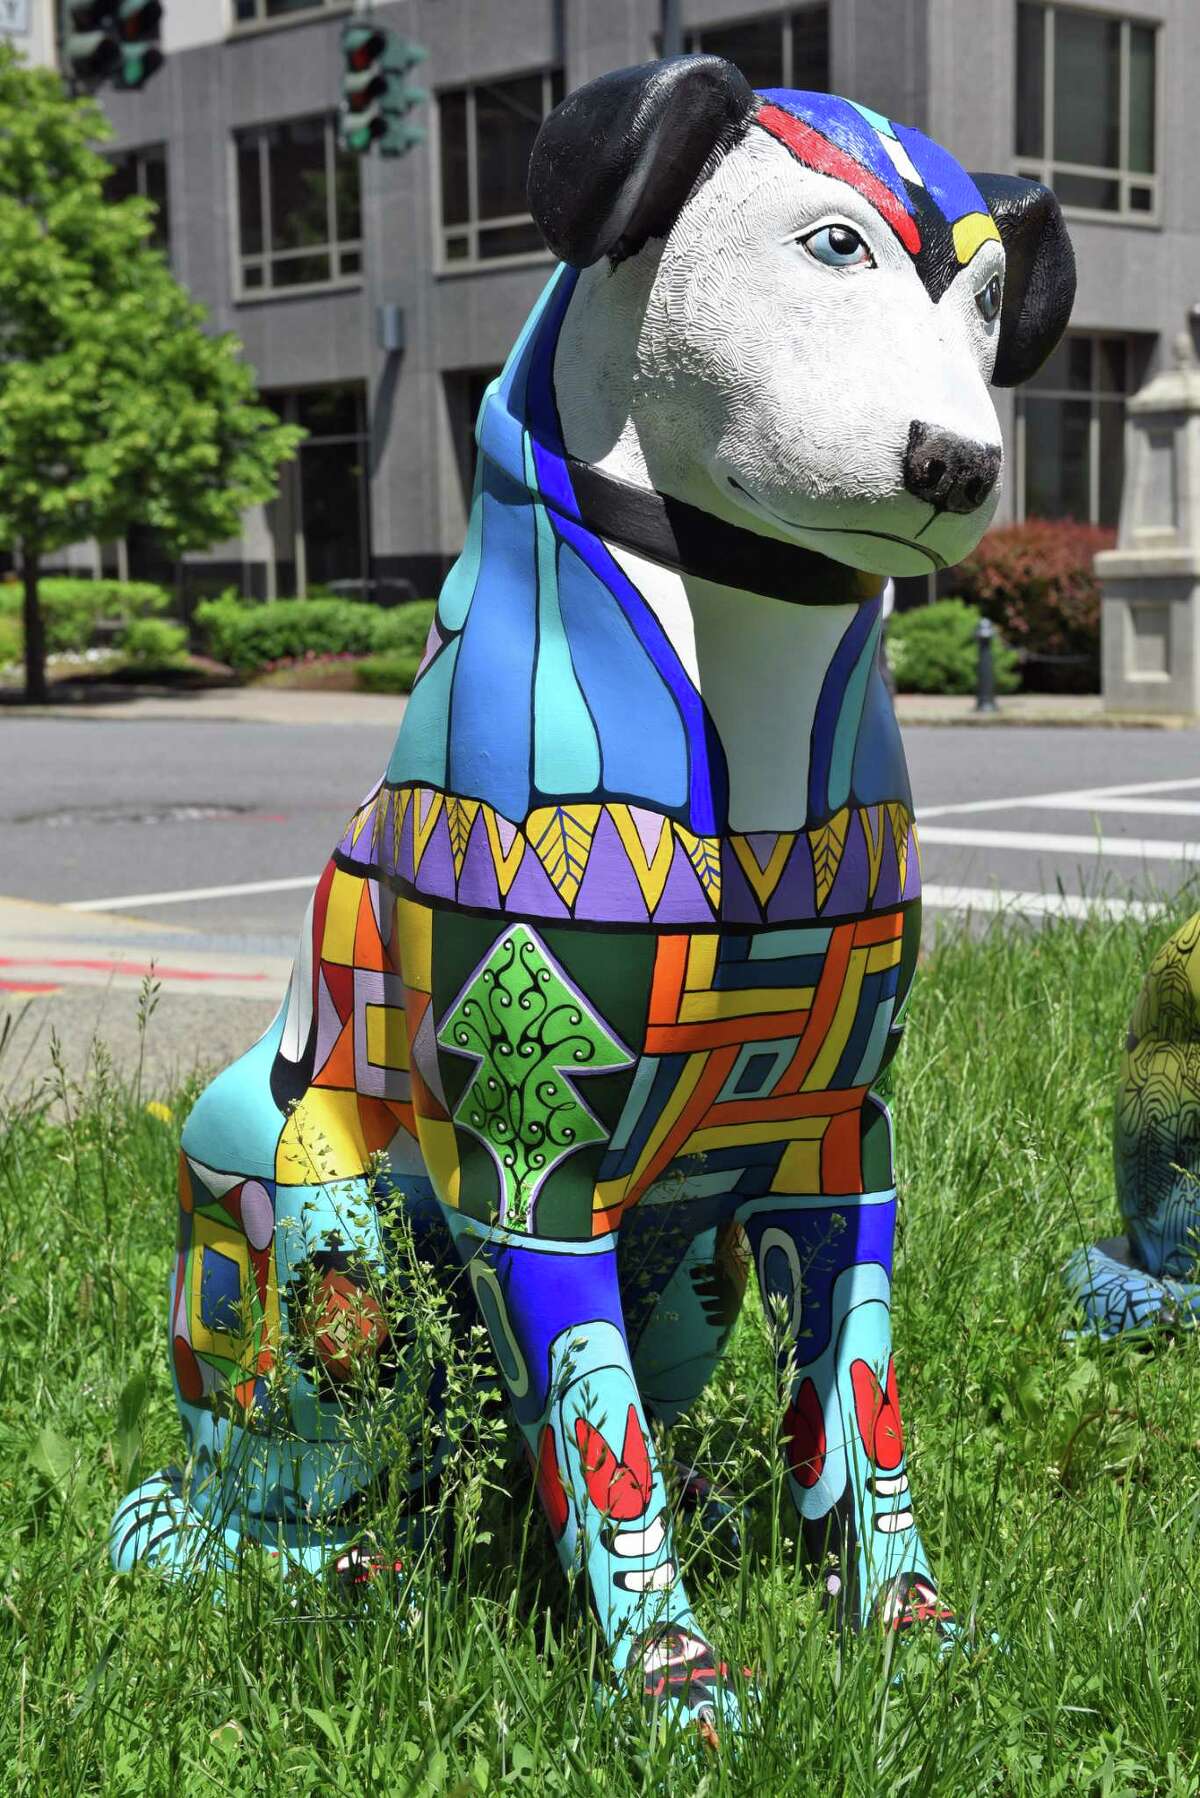 One of 20 3-foot-tall statues of Nipper as part of ODowntown is Pawsome,O outside the Albany Center Gallery Friday June 9, 2017 in Albany, NY. (John Carl D'Annibale / Times Union)